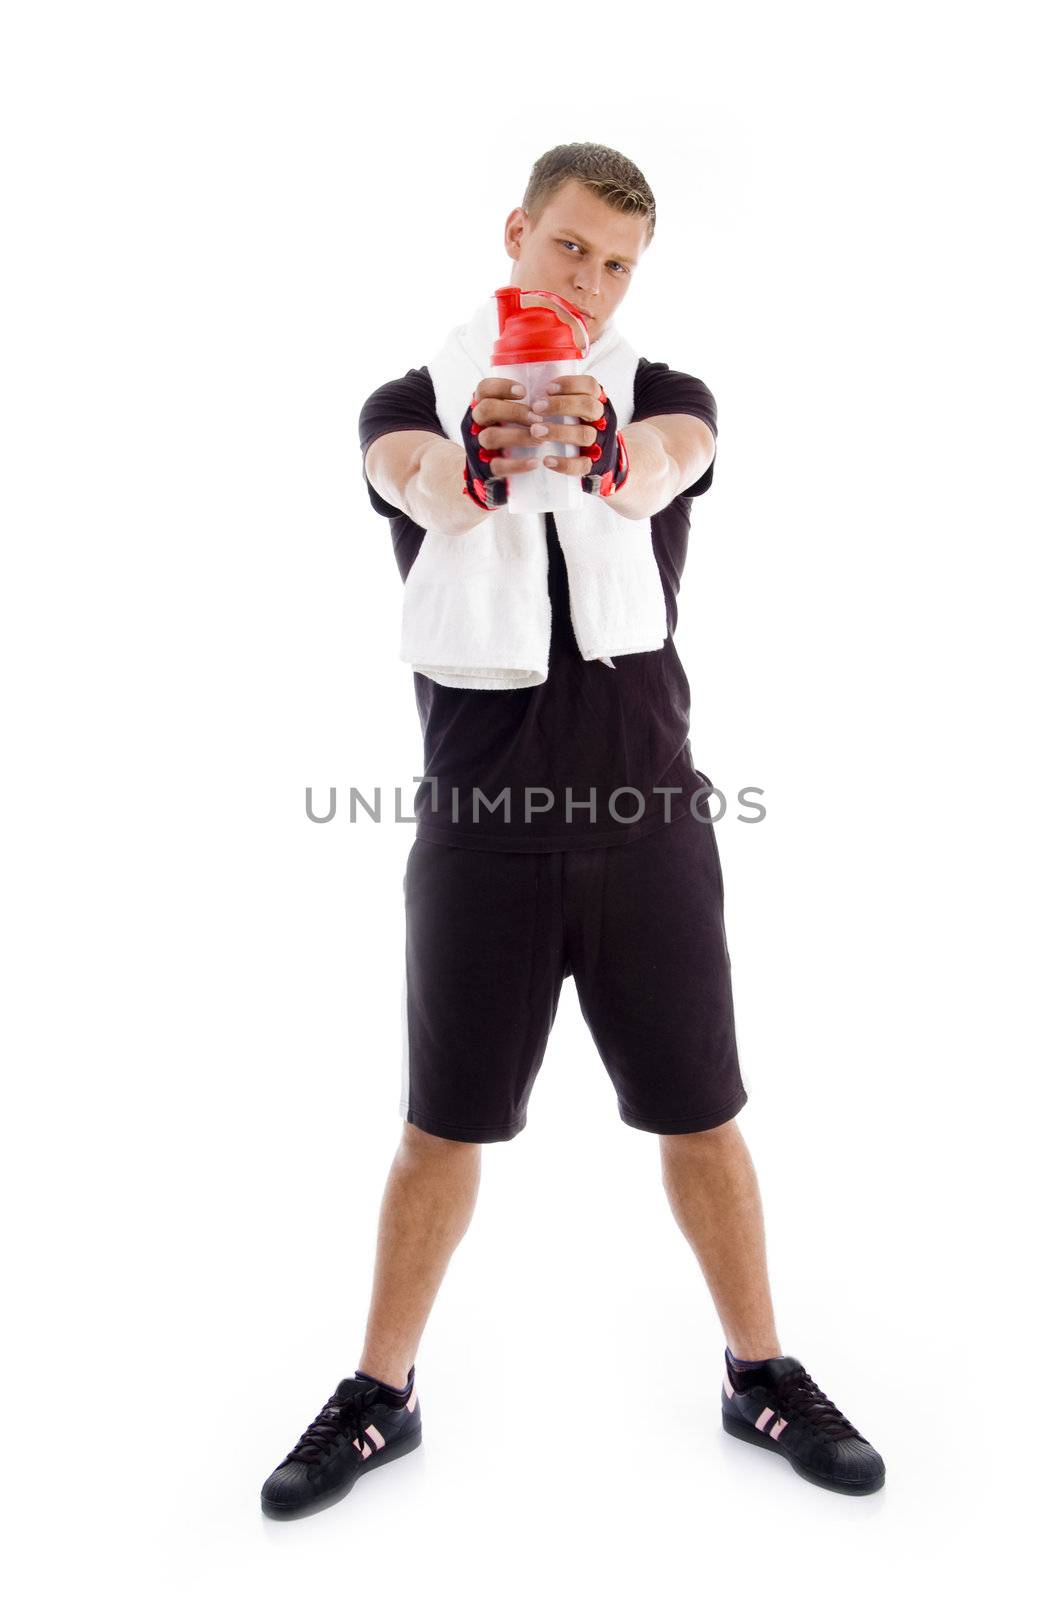 standing muscular male holding a water bottle on an isolated background